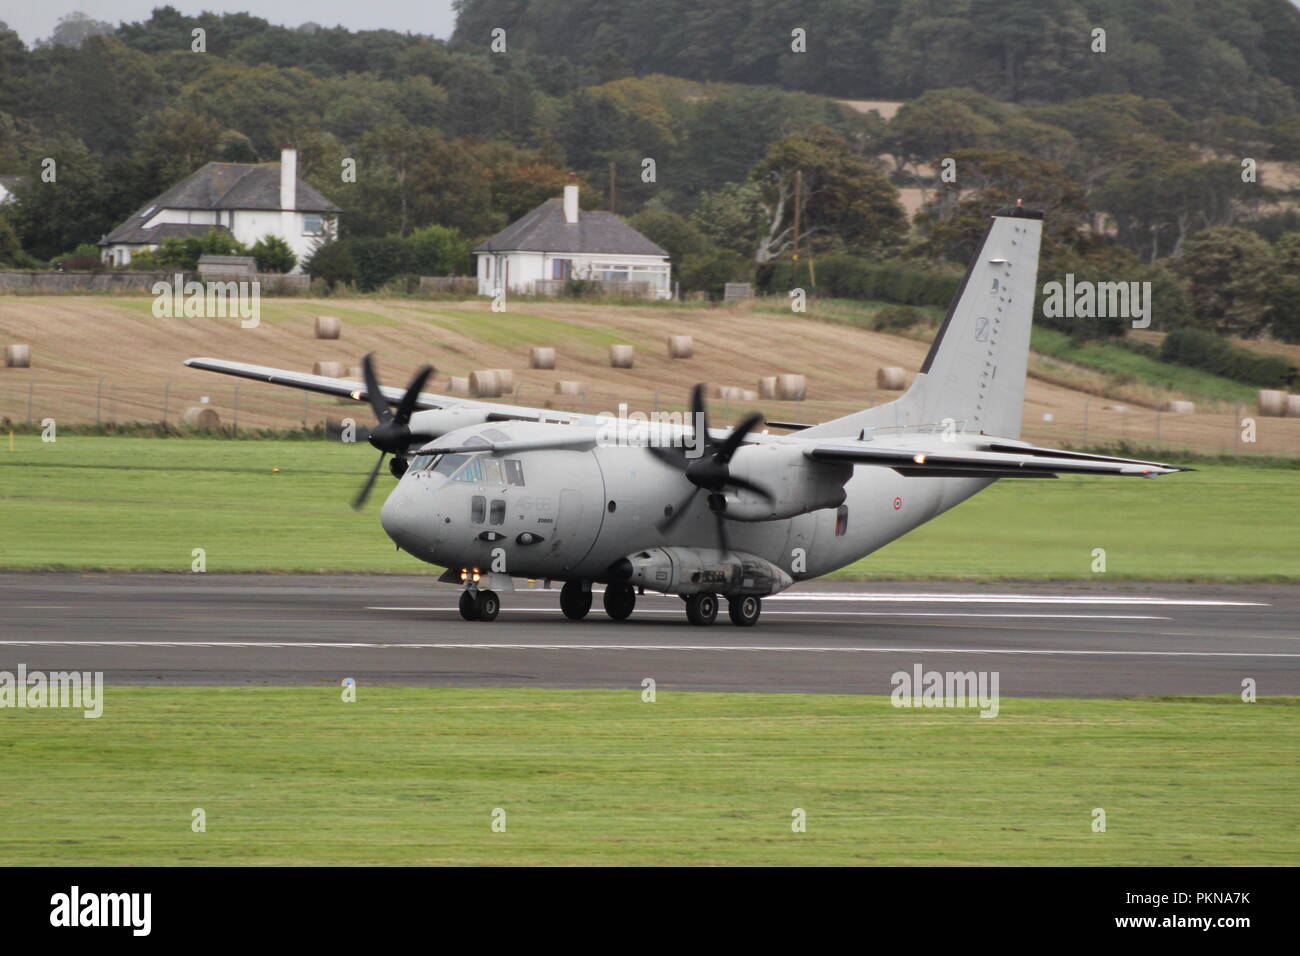 MM62222/46-86, an Alenia C-27J Spartan operated by the Italian Air Force, at Prestwick International Airport in Ayrshire for a quick refuelling stop. Stock Photo